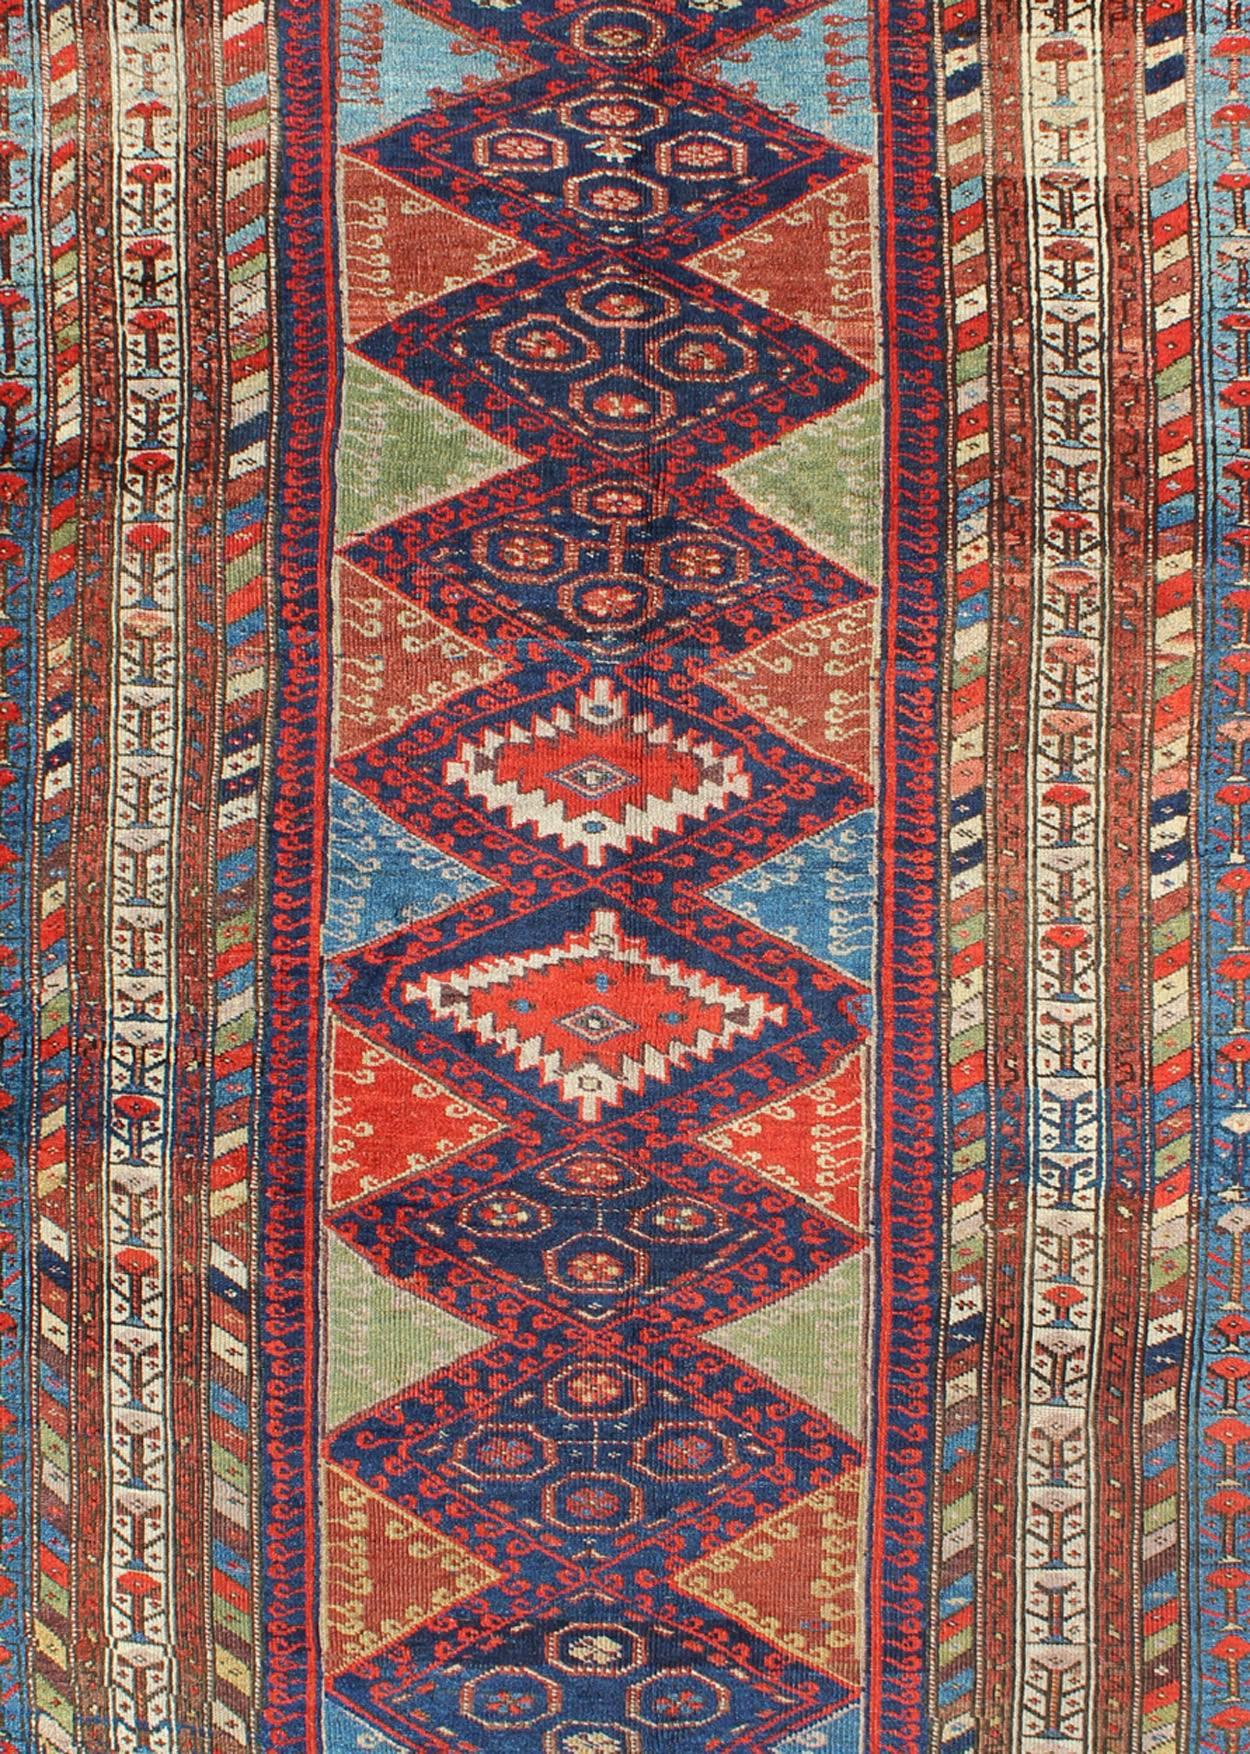 Persian Antique Kurdish Kazak with Tribal and Geometric Motifs In Blue, red & Green For Sale